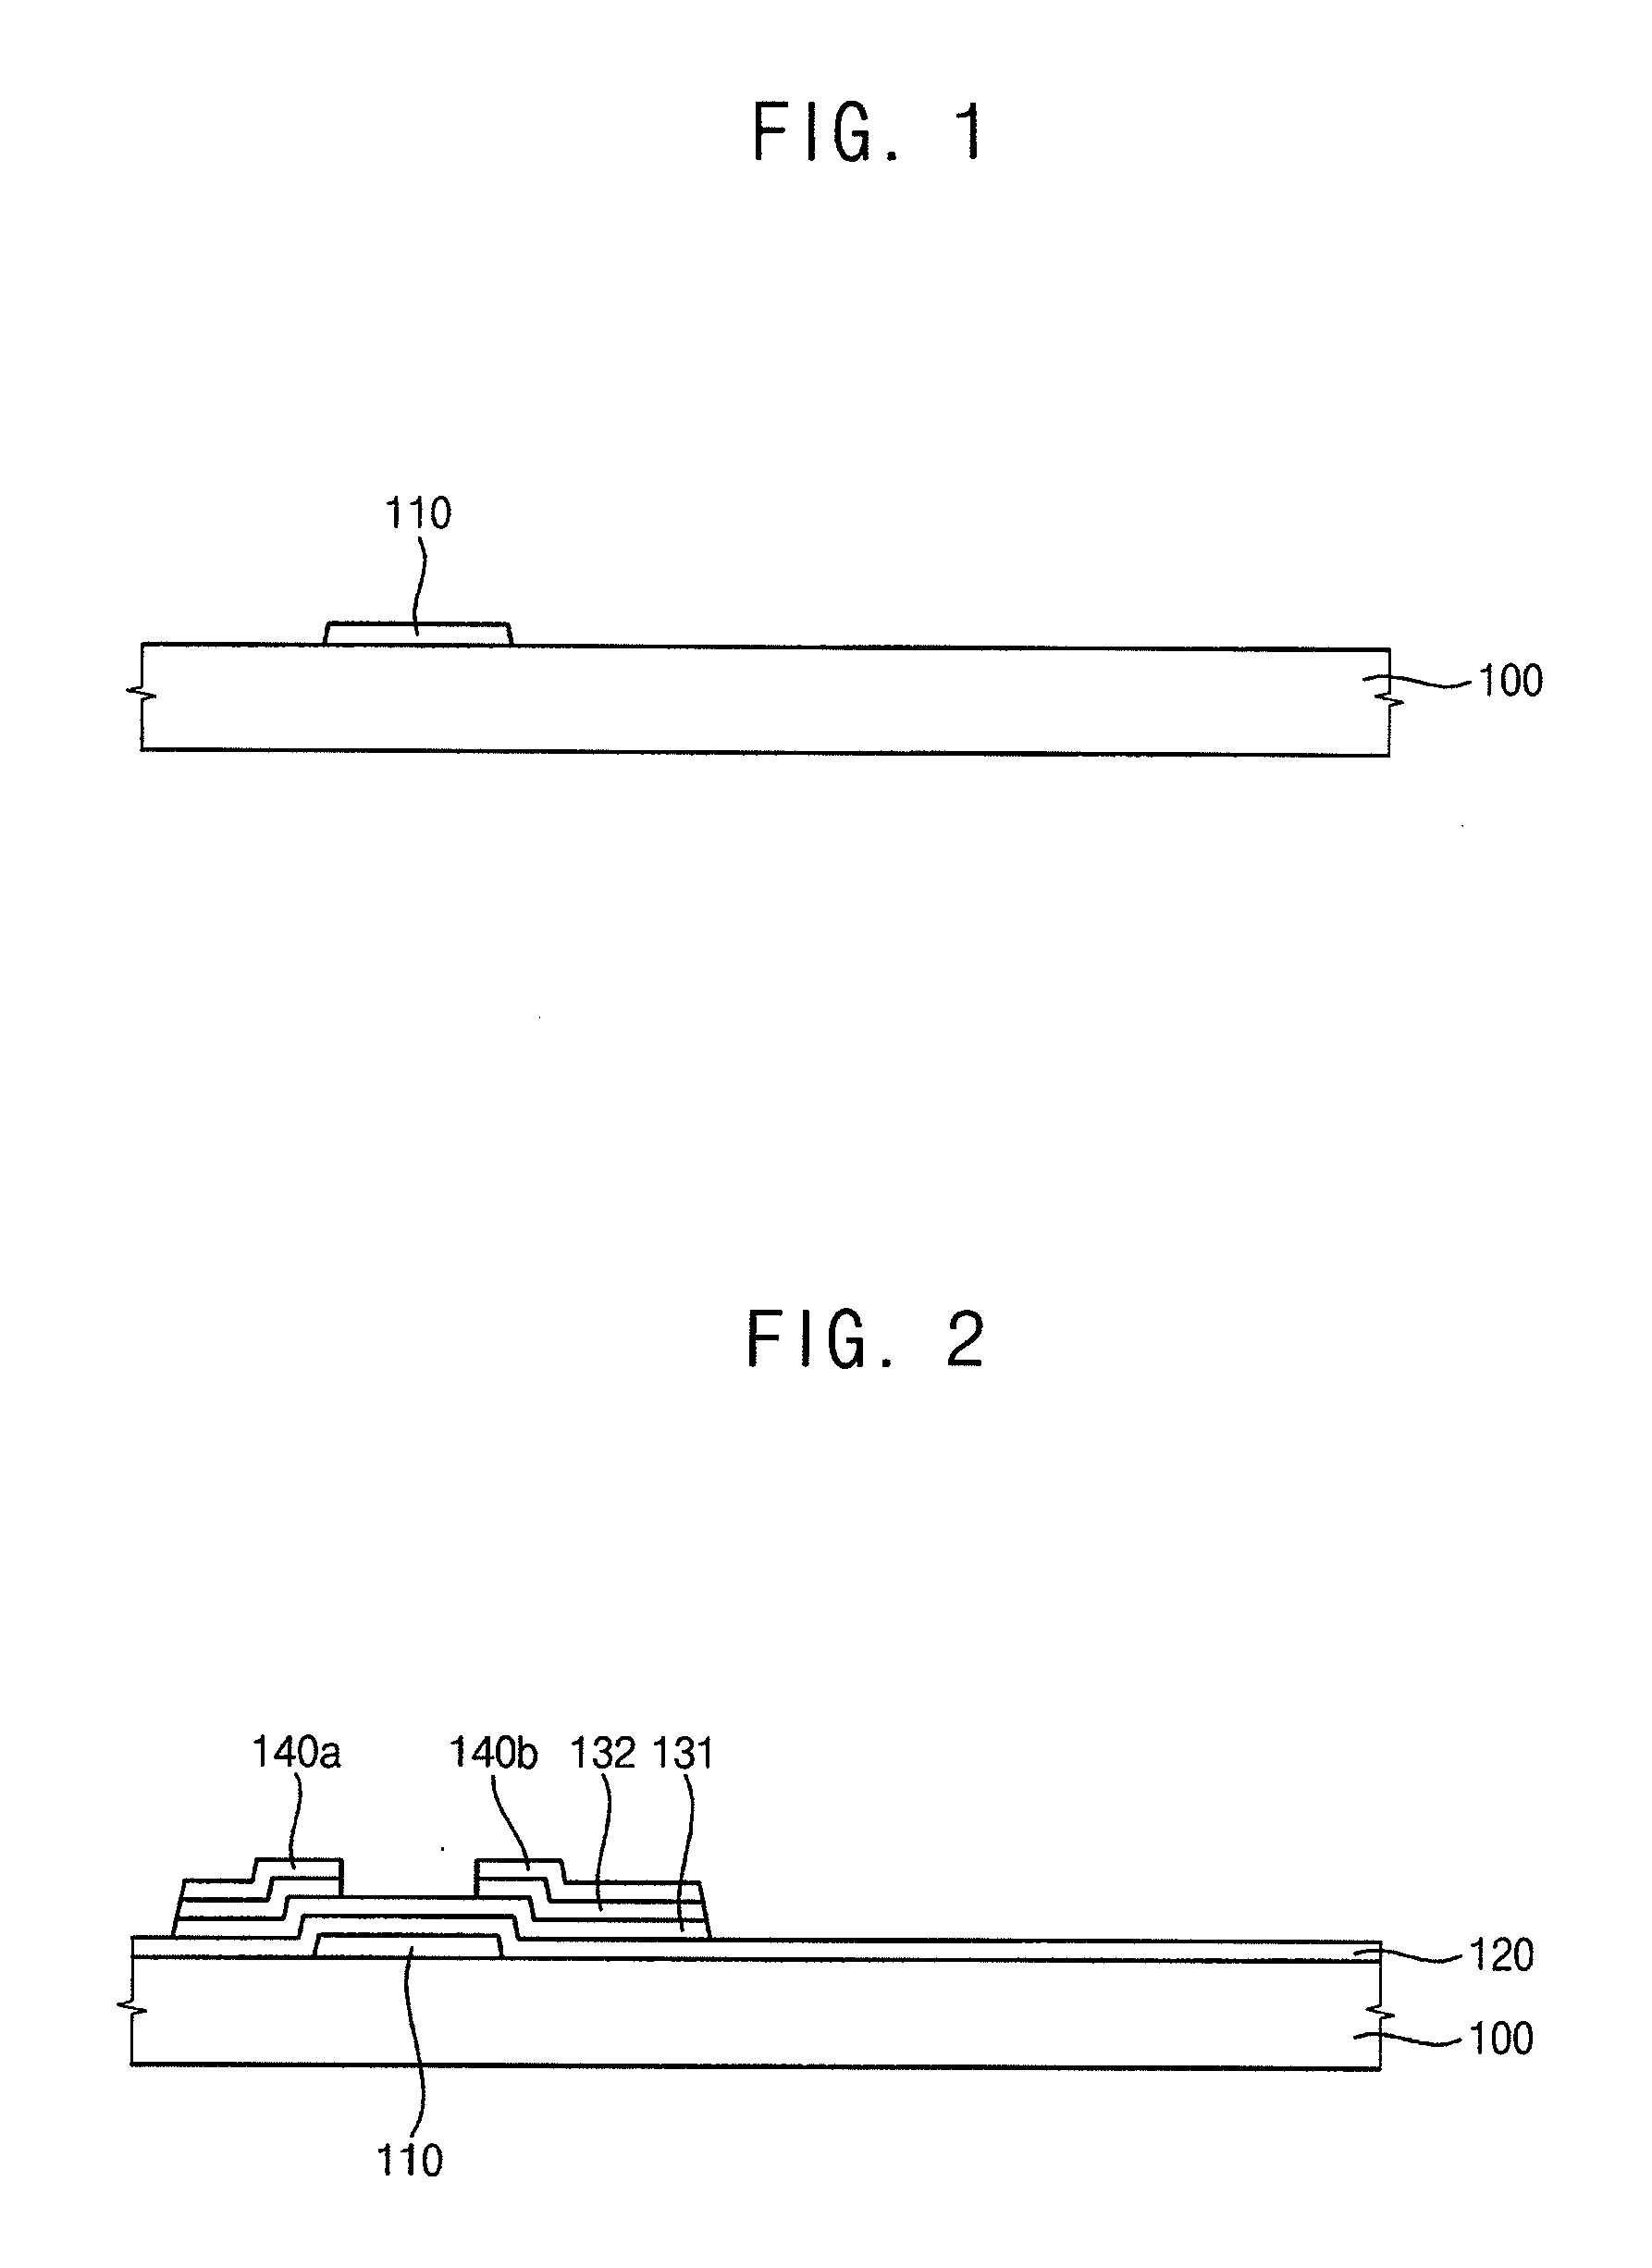 Etchant and method of manufacturing an array substrate using the same